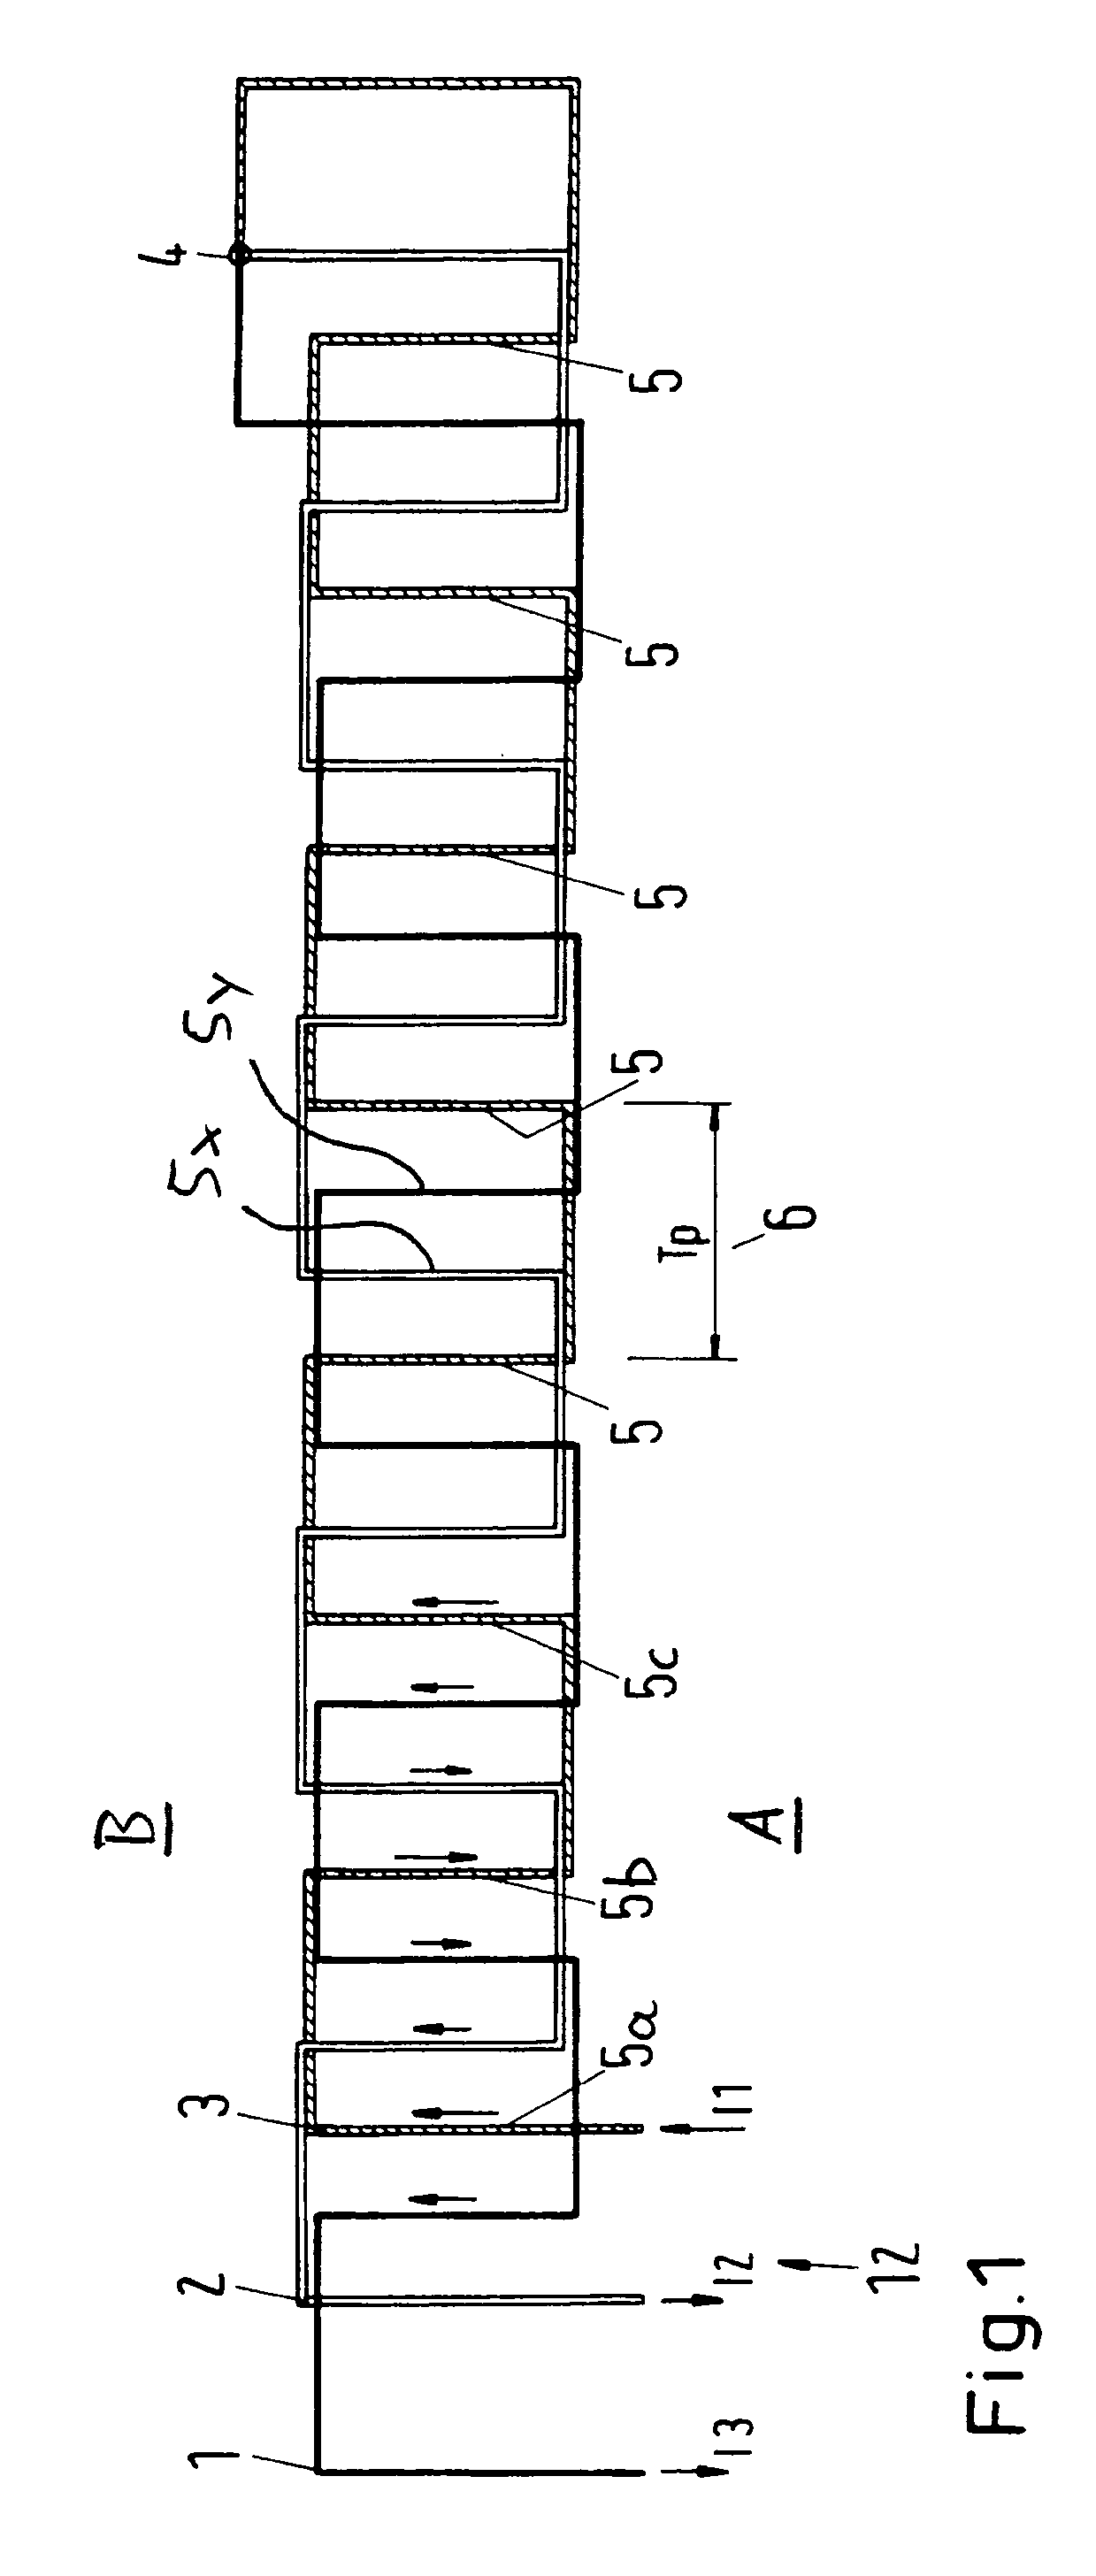 Inductively receiving electric energy for a vehicle